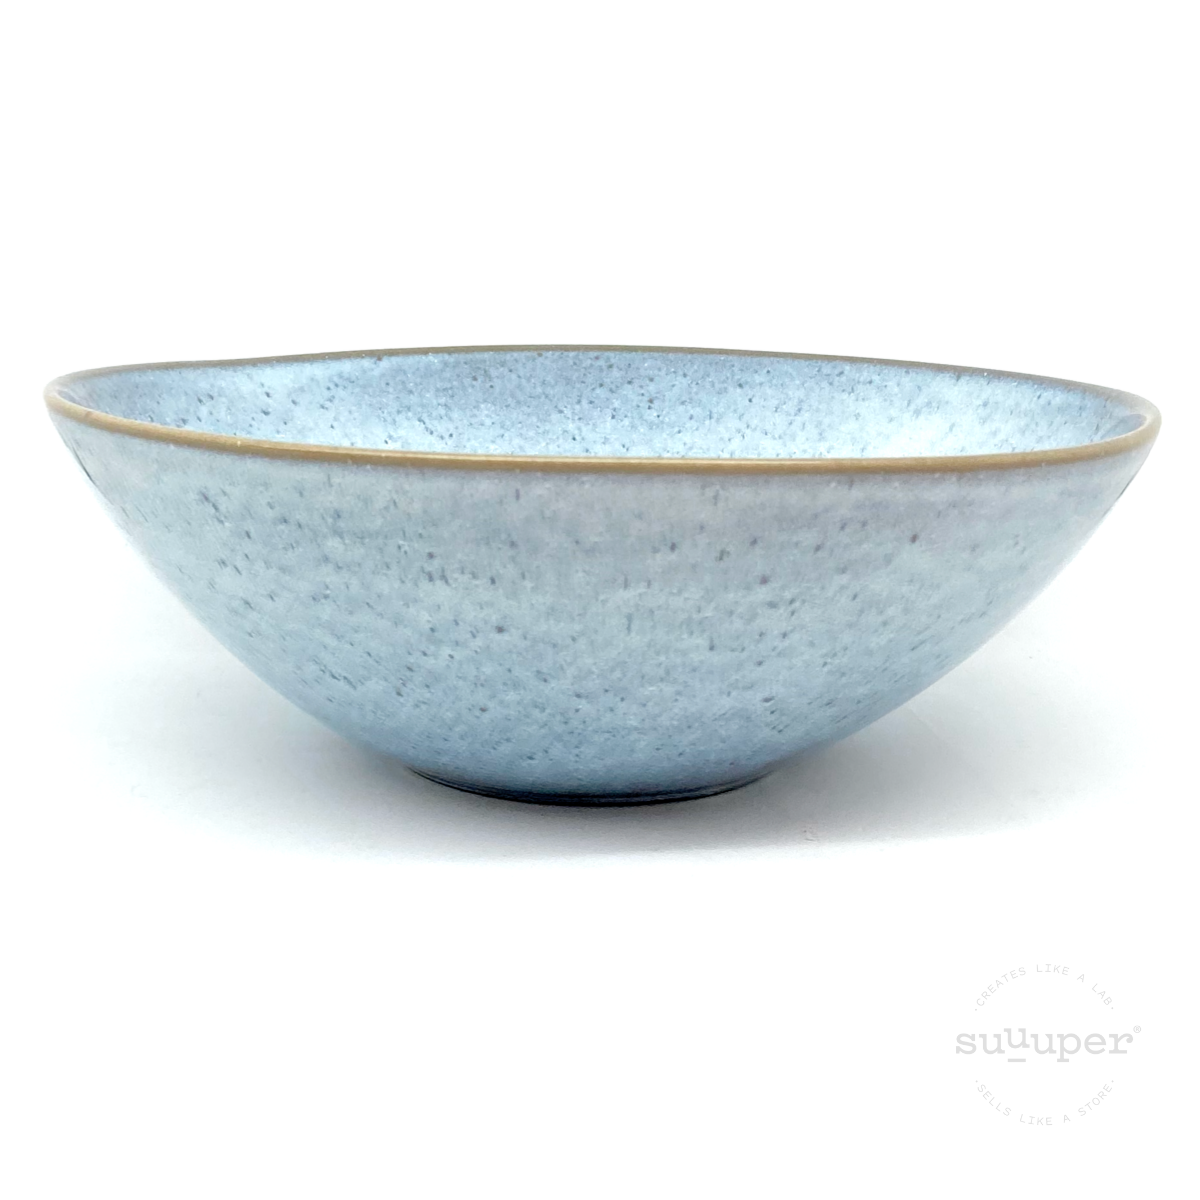 LIGHT BLUE SERVING BOWL by SUUUPER